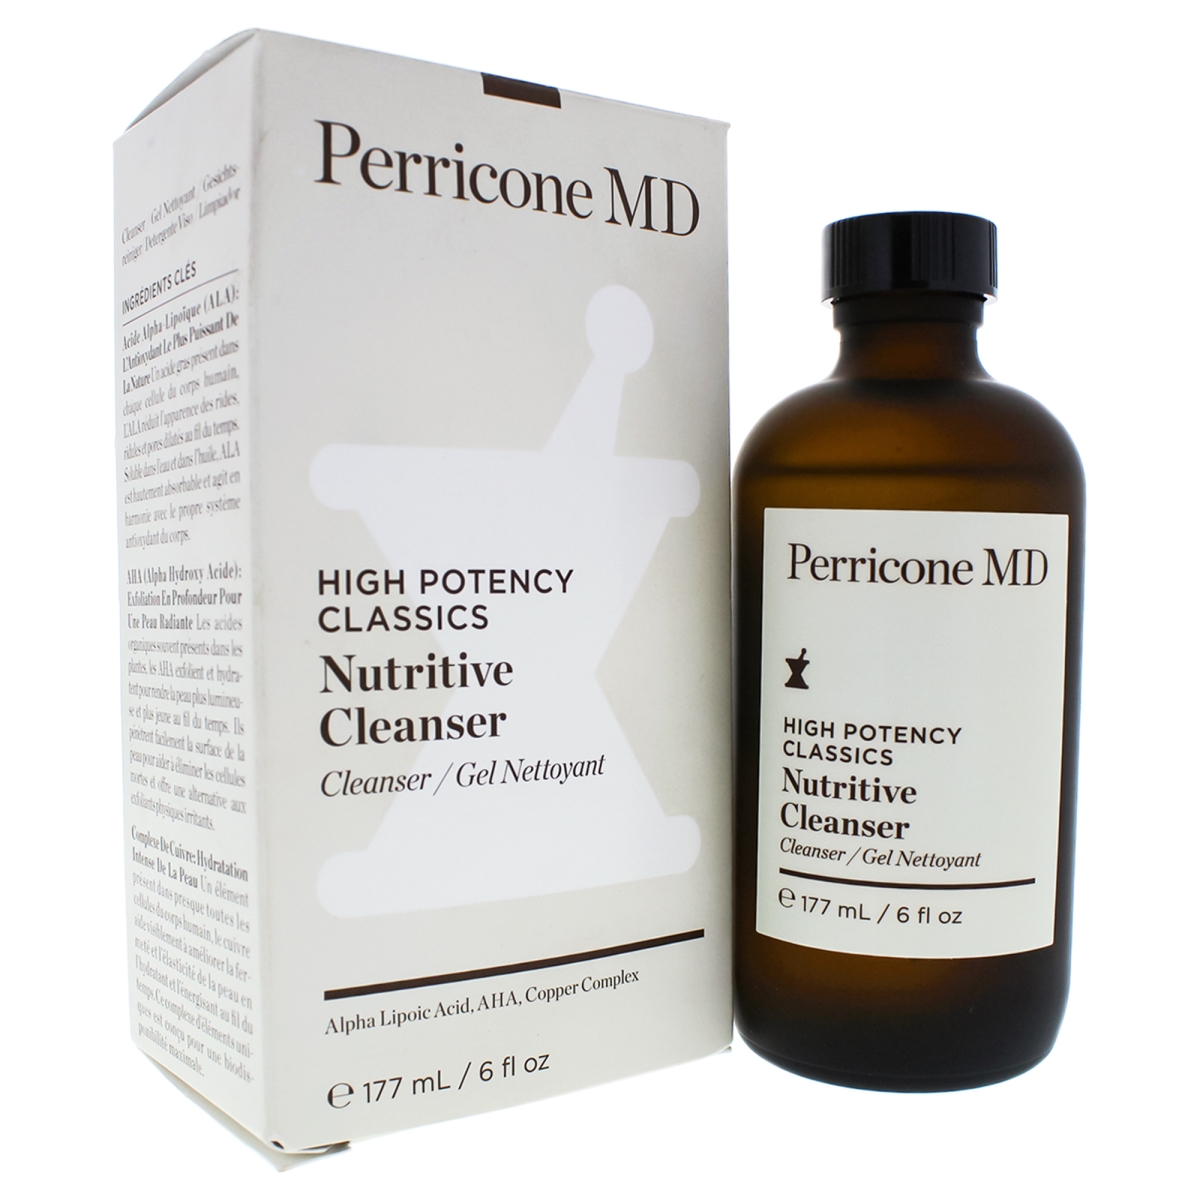 I0087930 High Potency Classics Nutritive Cleanser for Unisex - 6 oz -  Perricone Md